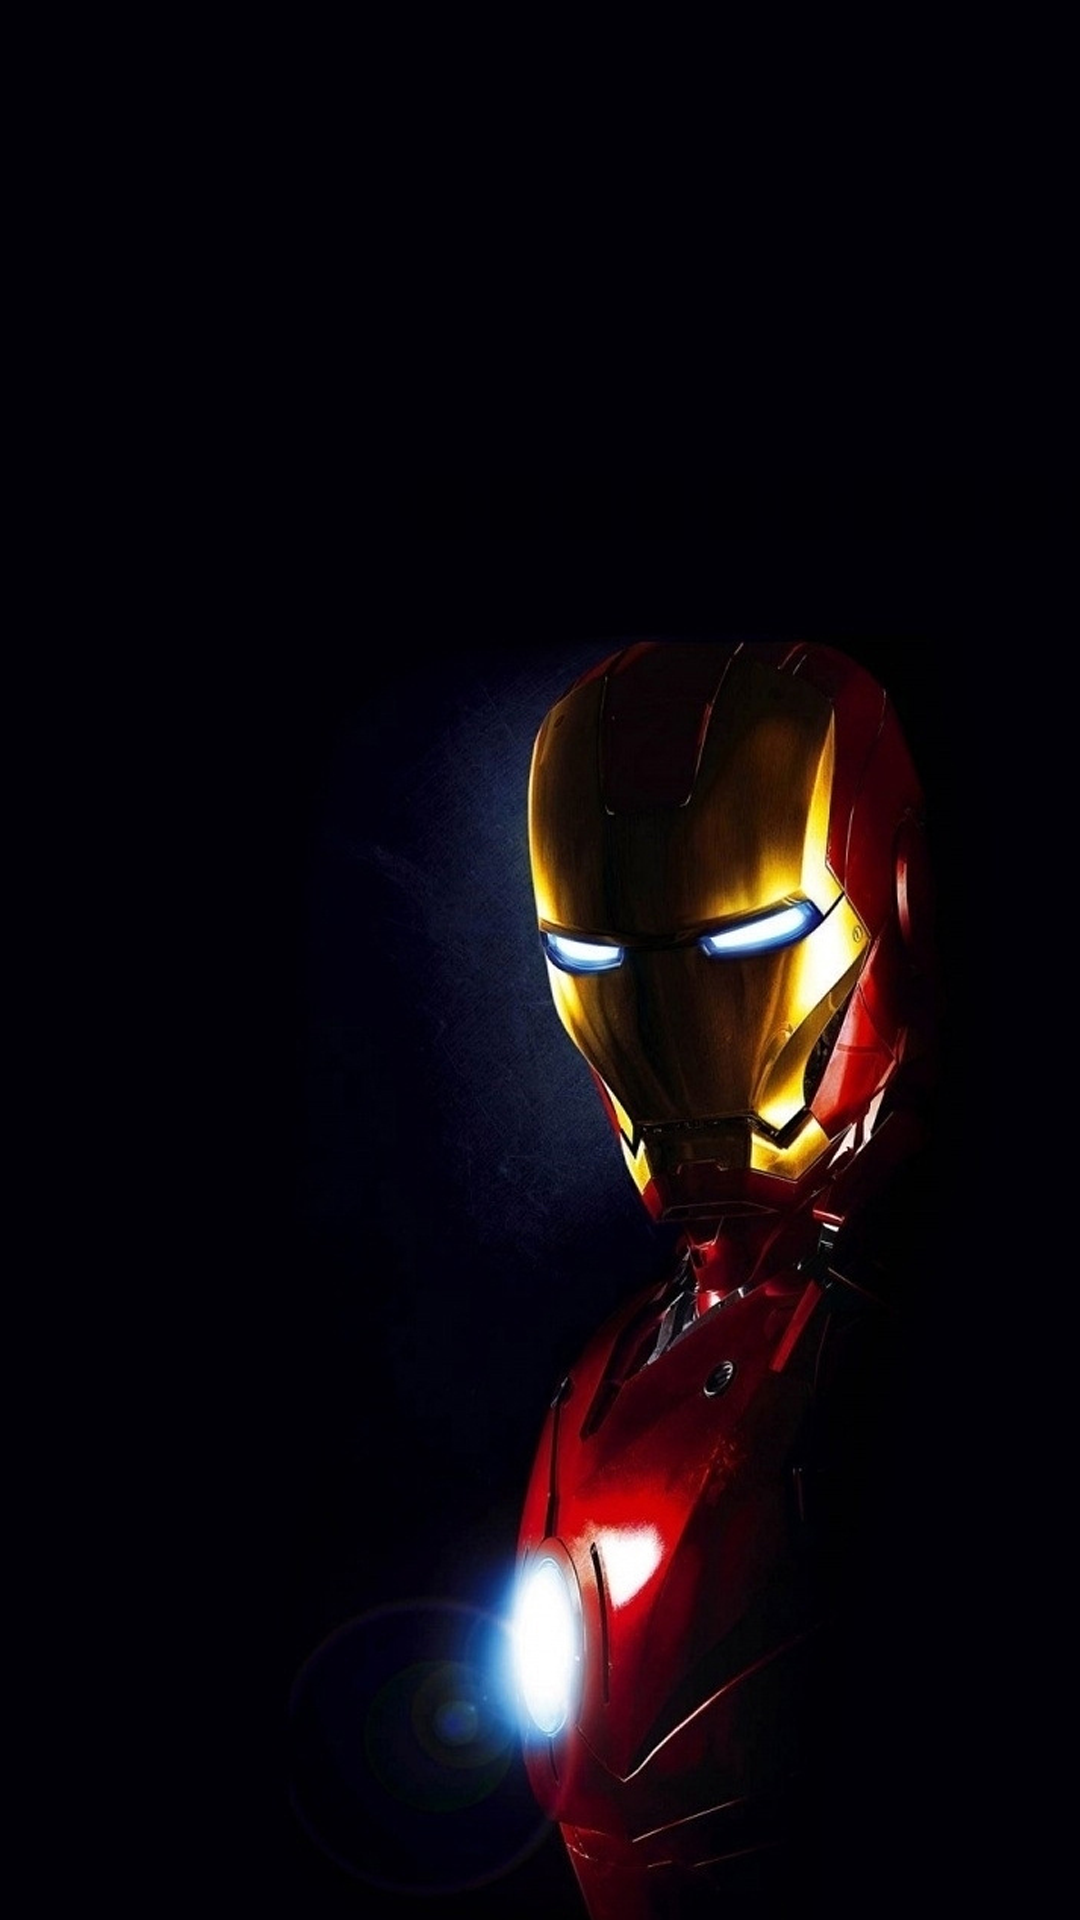 Iron Man Mask Live WallpaperAmazoncomAppstore for Android